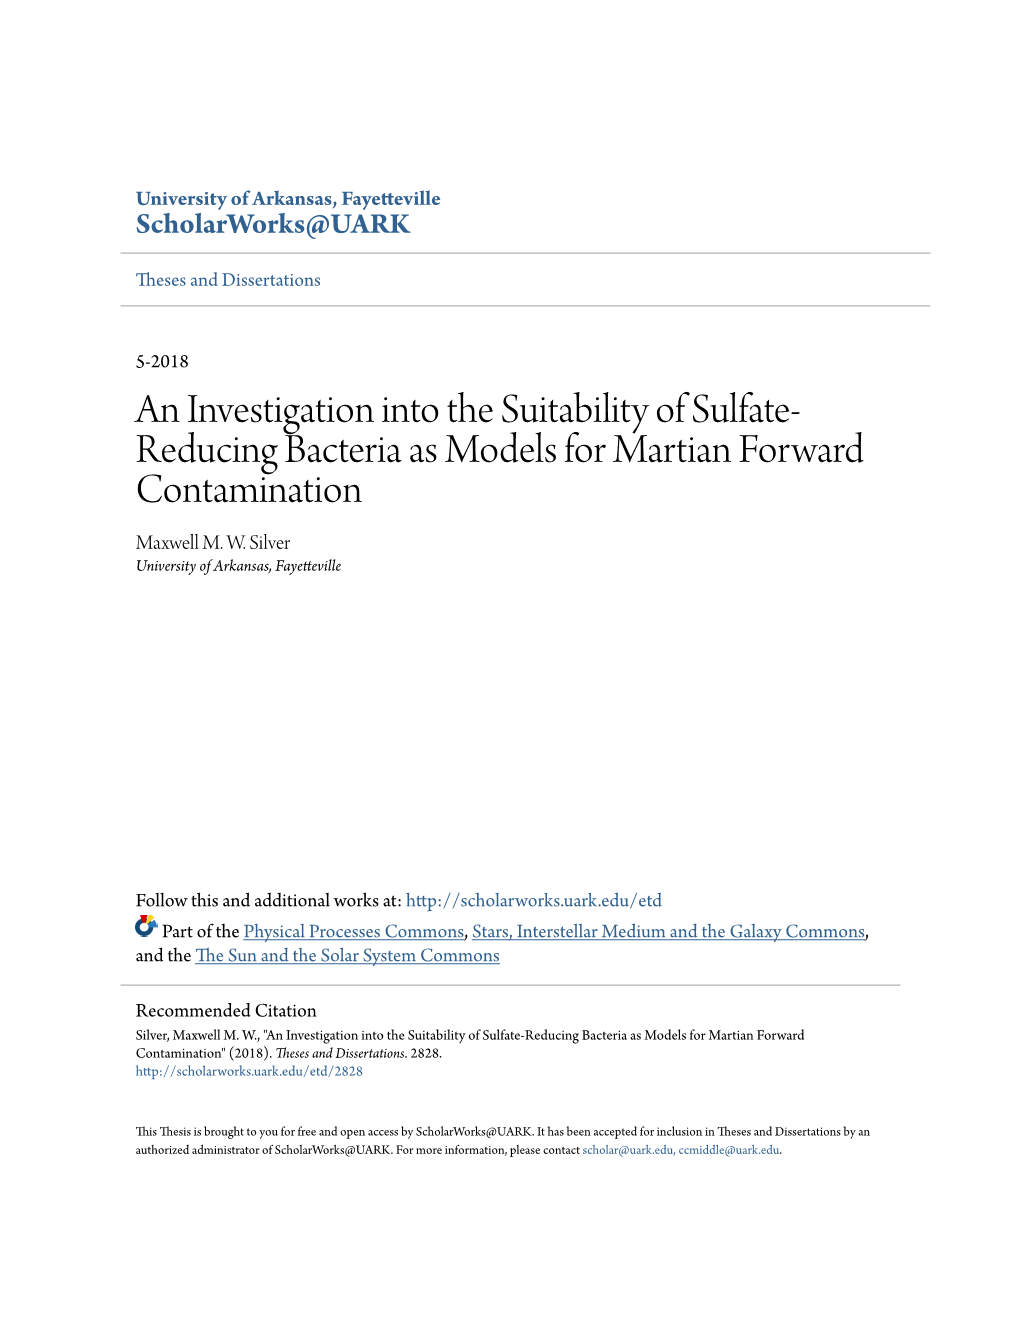 An Investigation Into the Suitability of Sulfate-Reducing Bacteria As Models for Martian Forward Contamination" (2018)